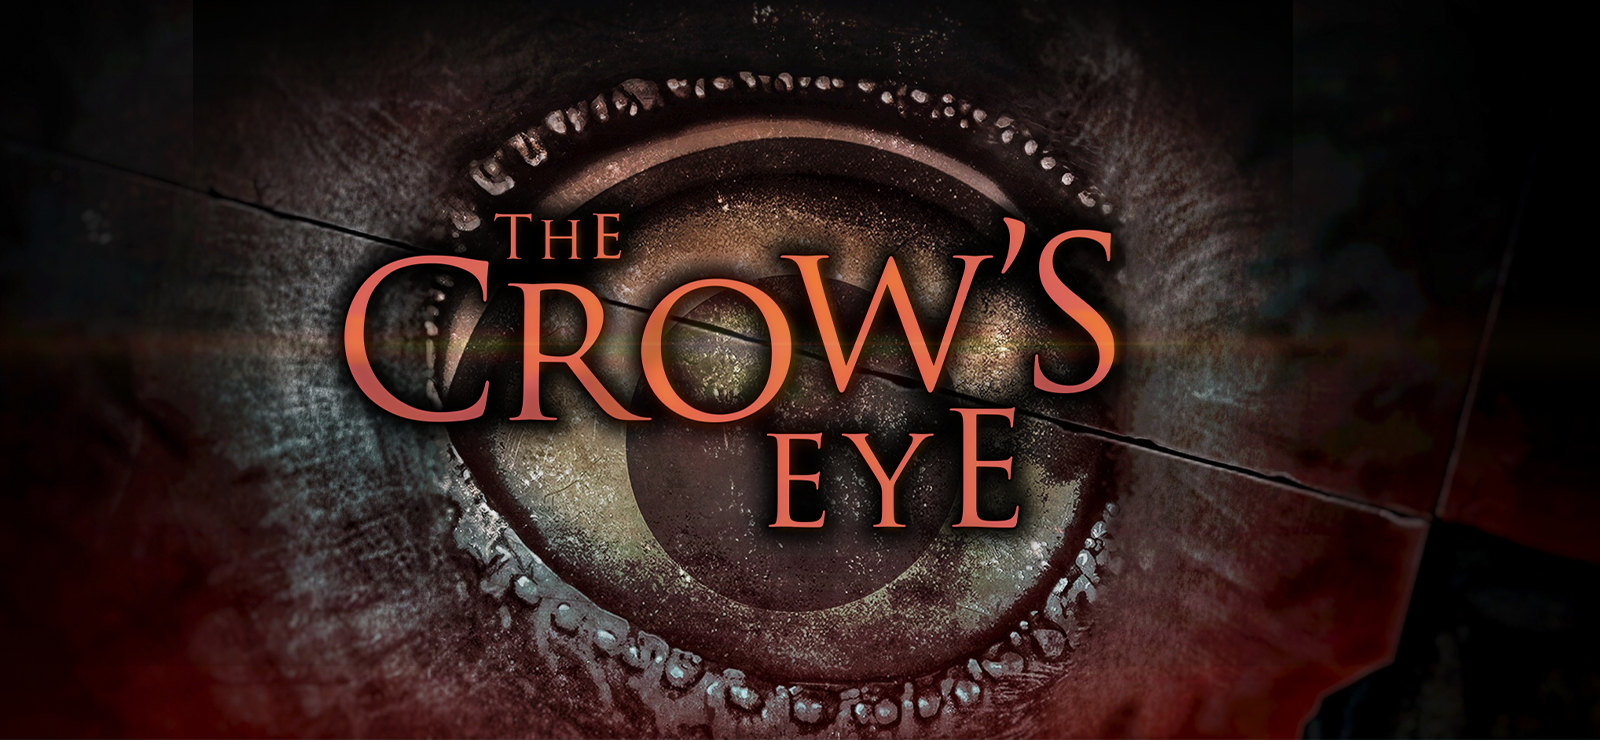 The Crow's Eye - Deluxe Edition